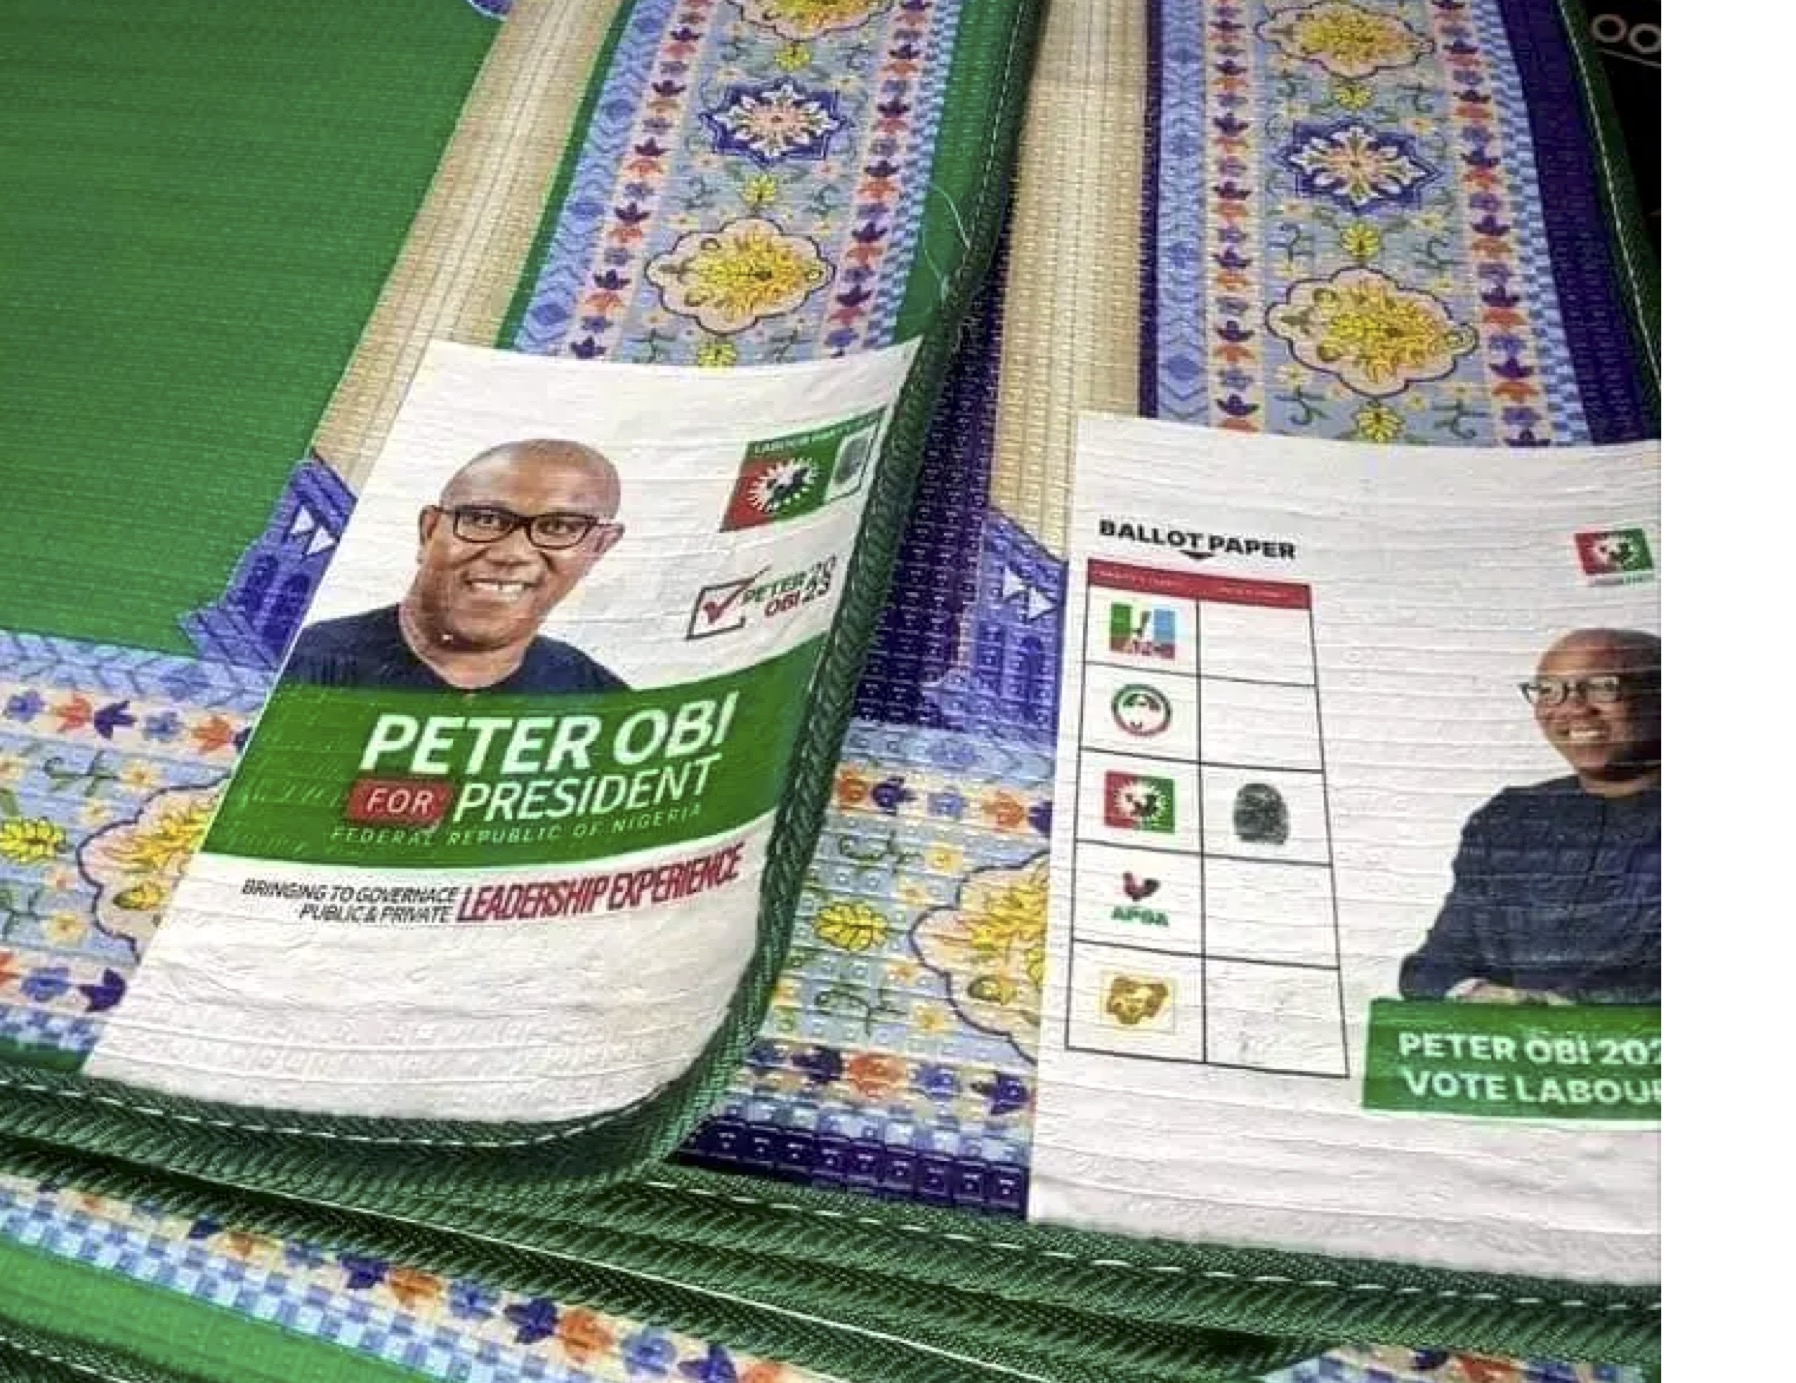 USAfrica: Nigeria's Peter Obi says his campaign not involved in decision by a support group to add his picture on Muslim prayer mats